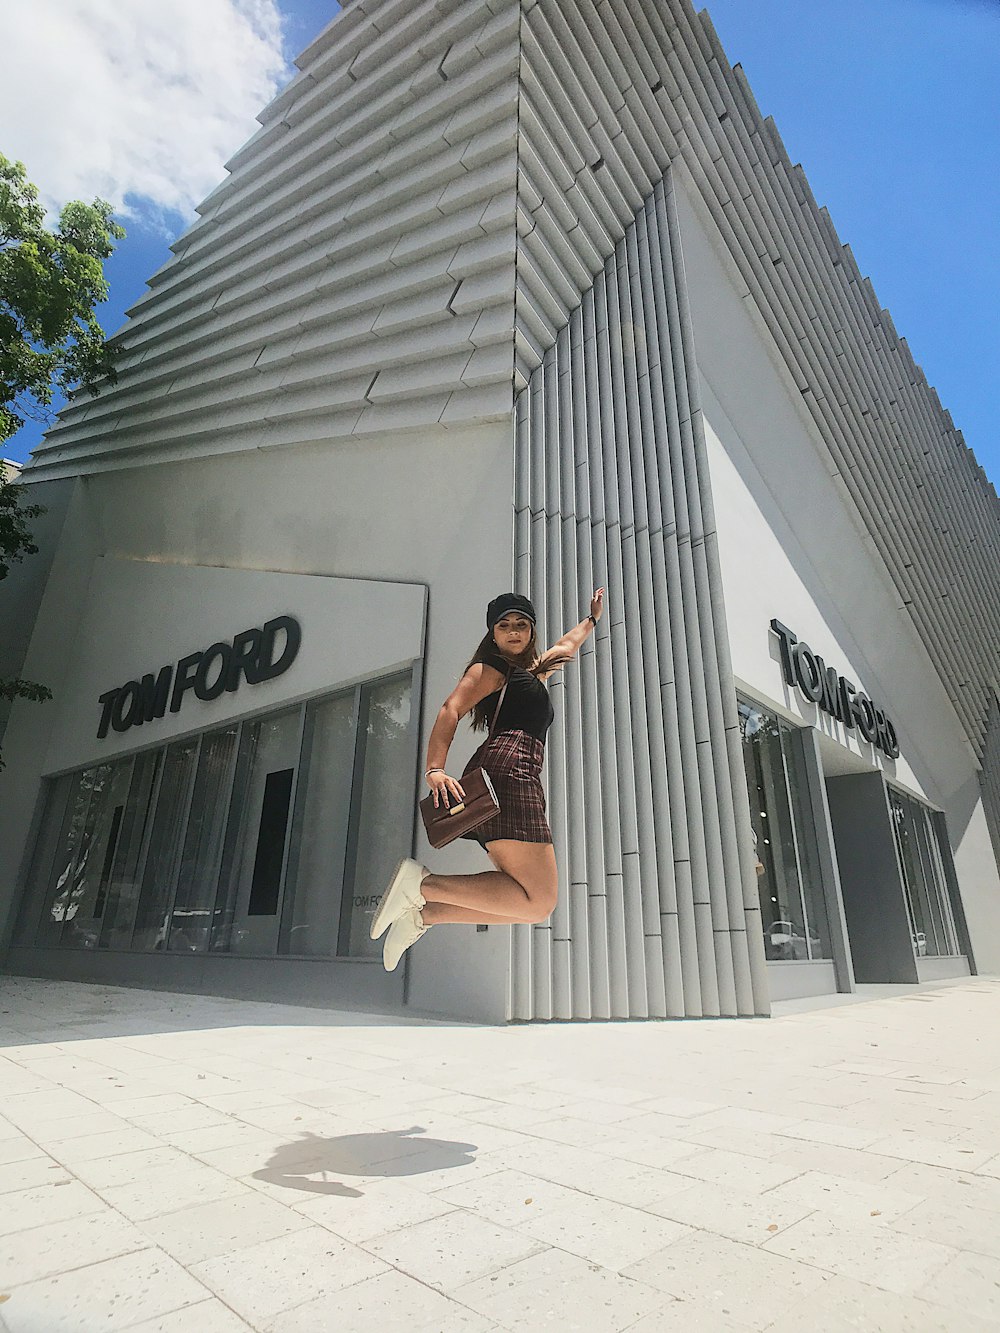 jumping woman near Tom Ford building during daytime